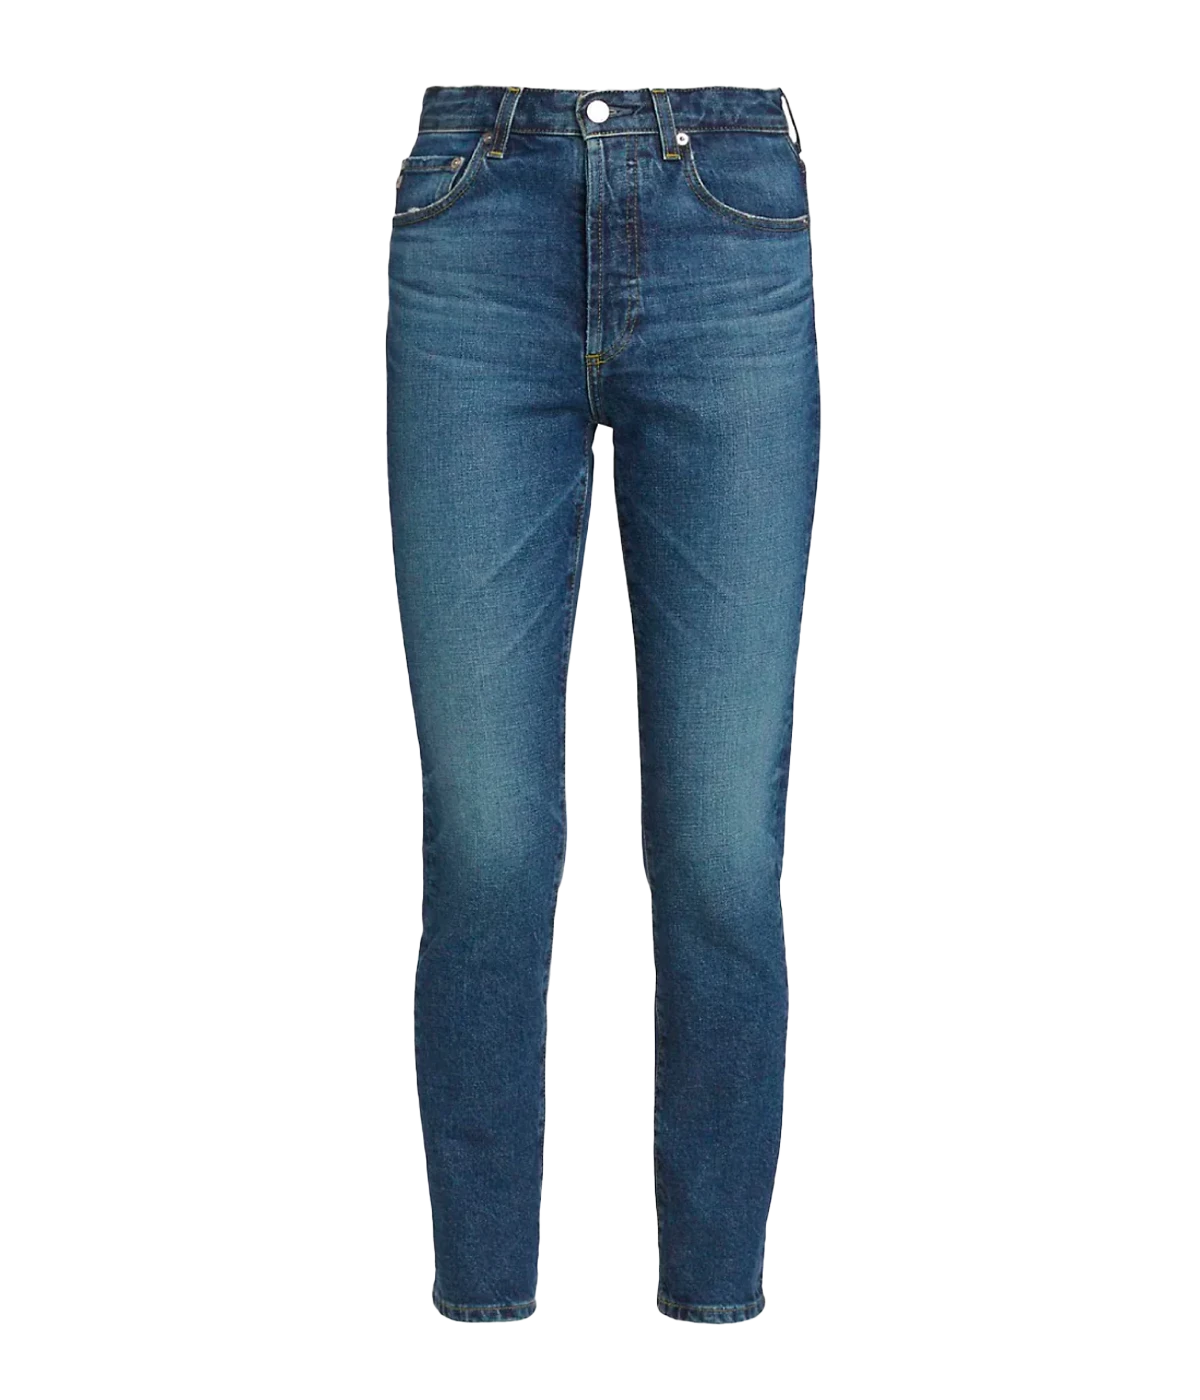 Image of a mid wash skinny jean, with silver hardware, belt loop holes, button and fly fastening and washed vintage look,  